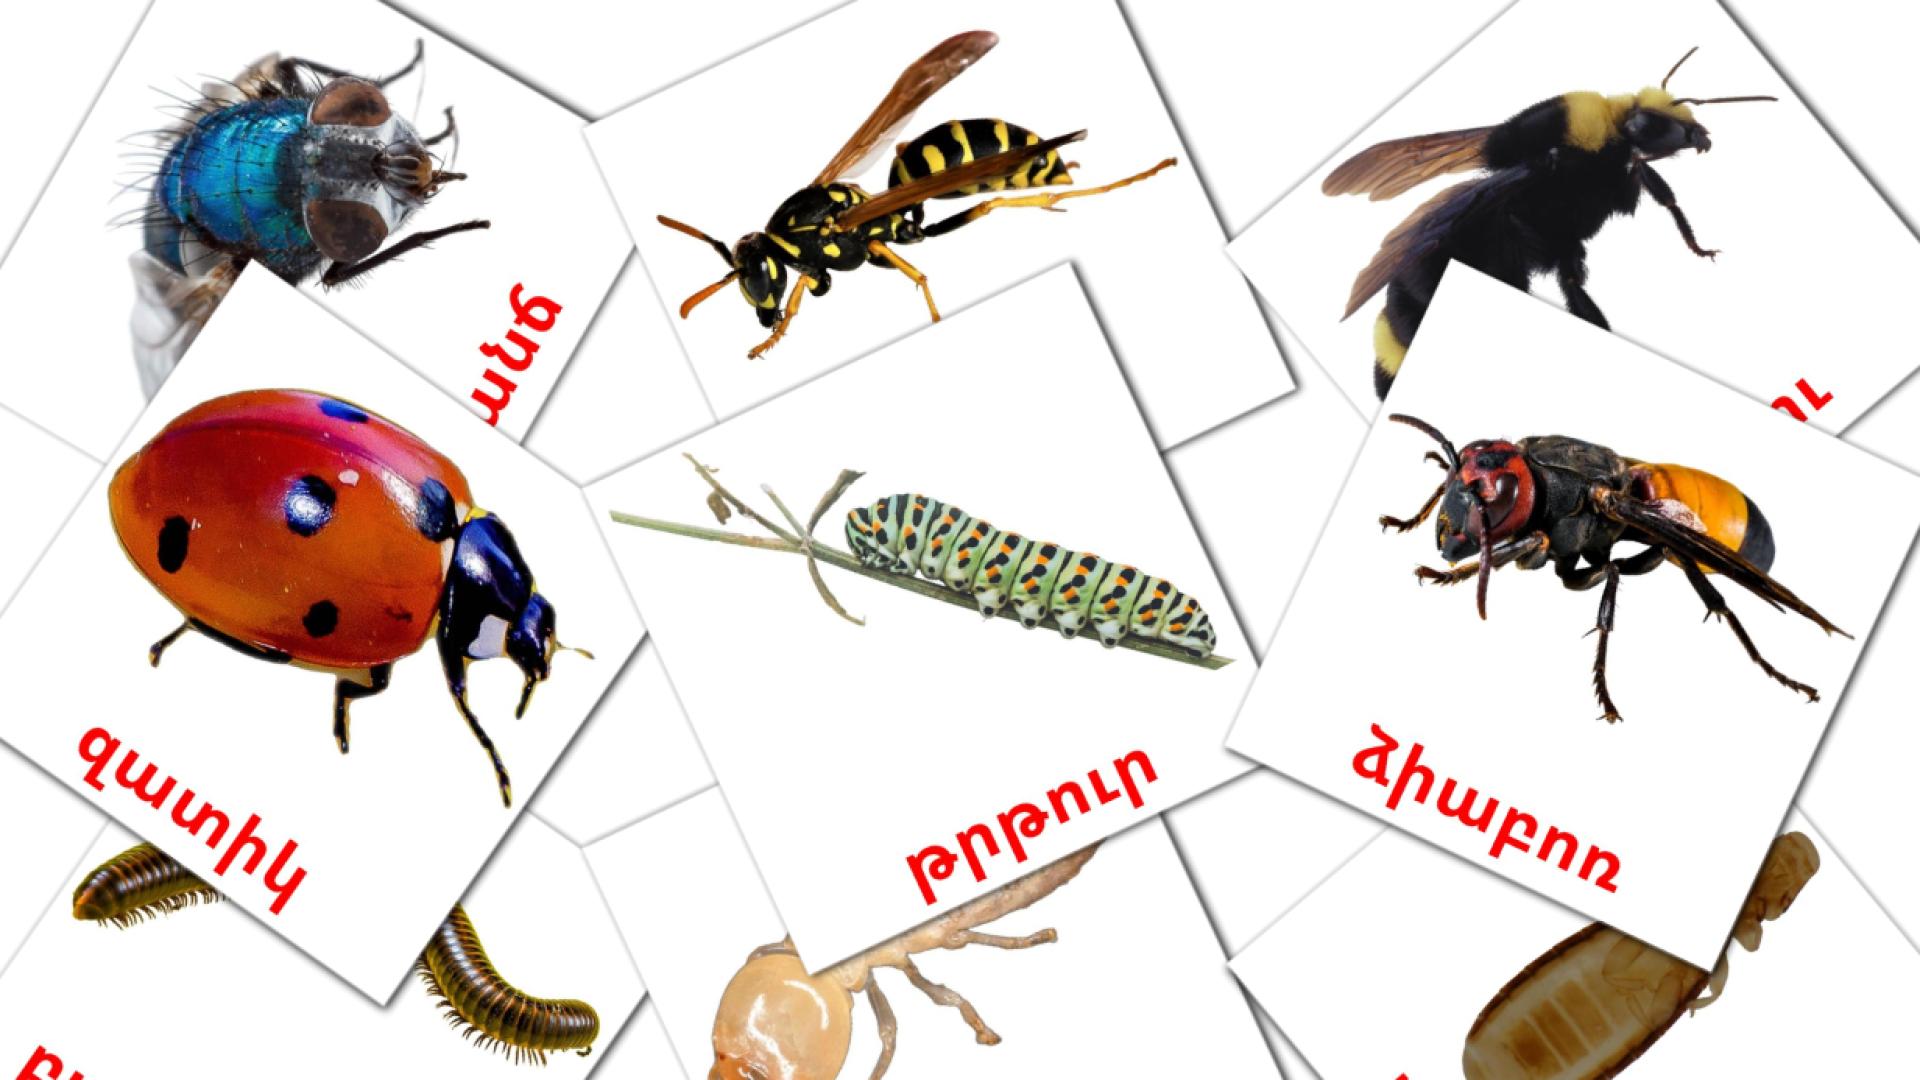 Insects - armenian vocabulary cards